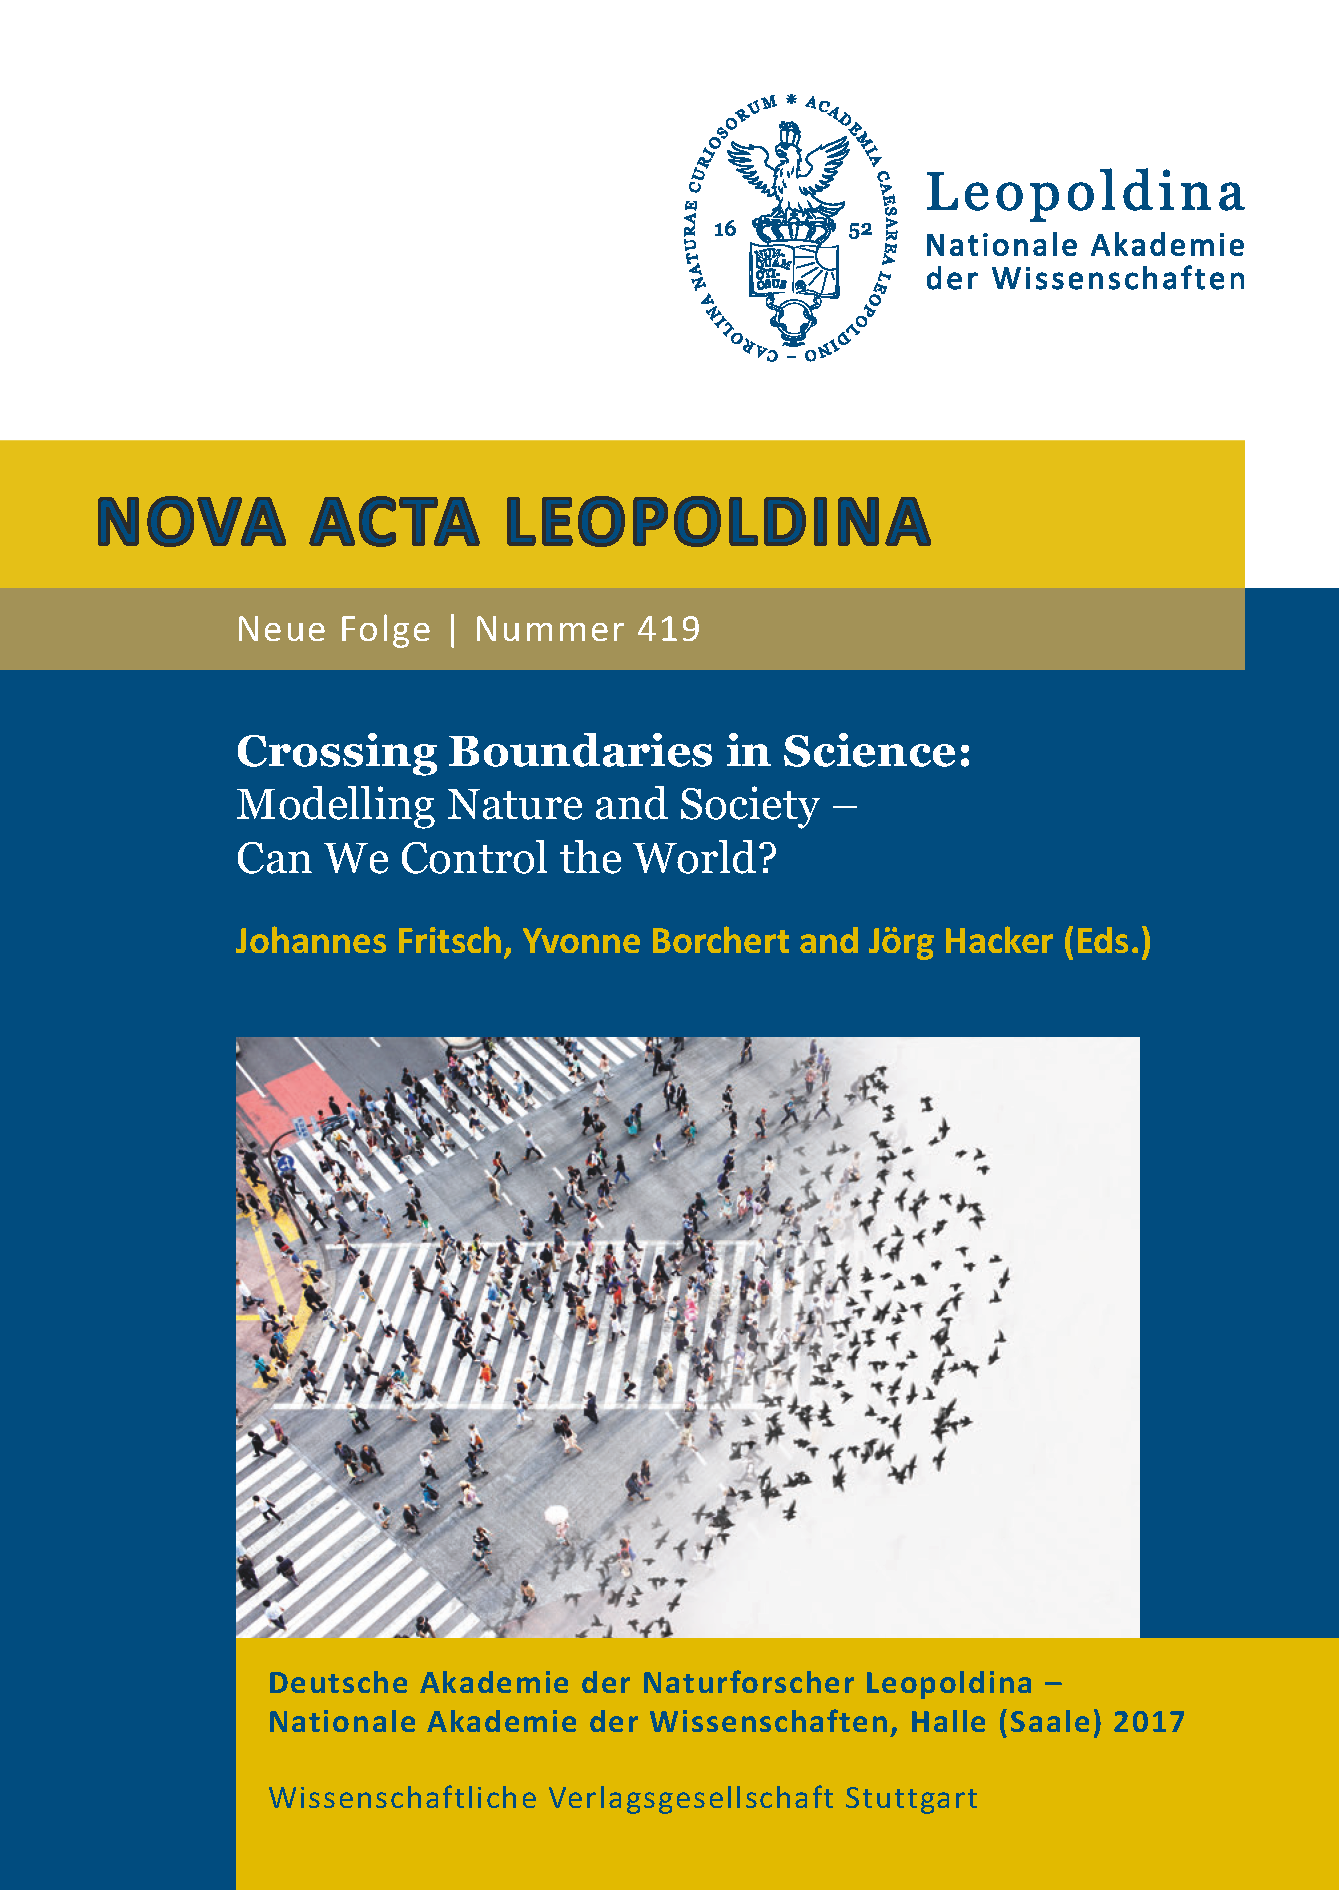 Leopoldina, Nationale Akademie der Wissenschaften, Crossing Boundaries in Science: Modelling Nature and Society – Can We Control the World?